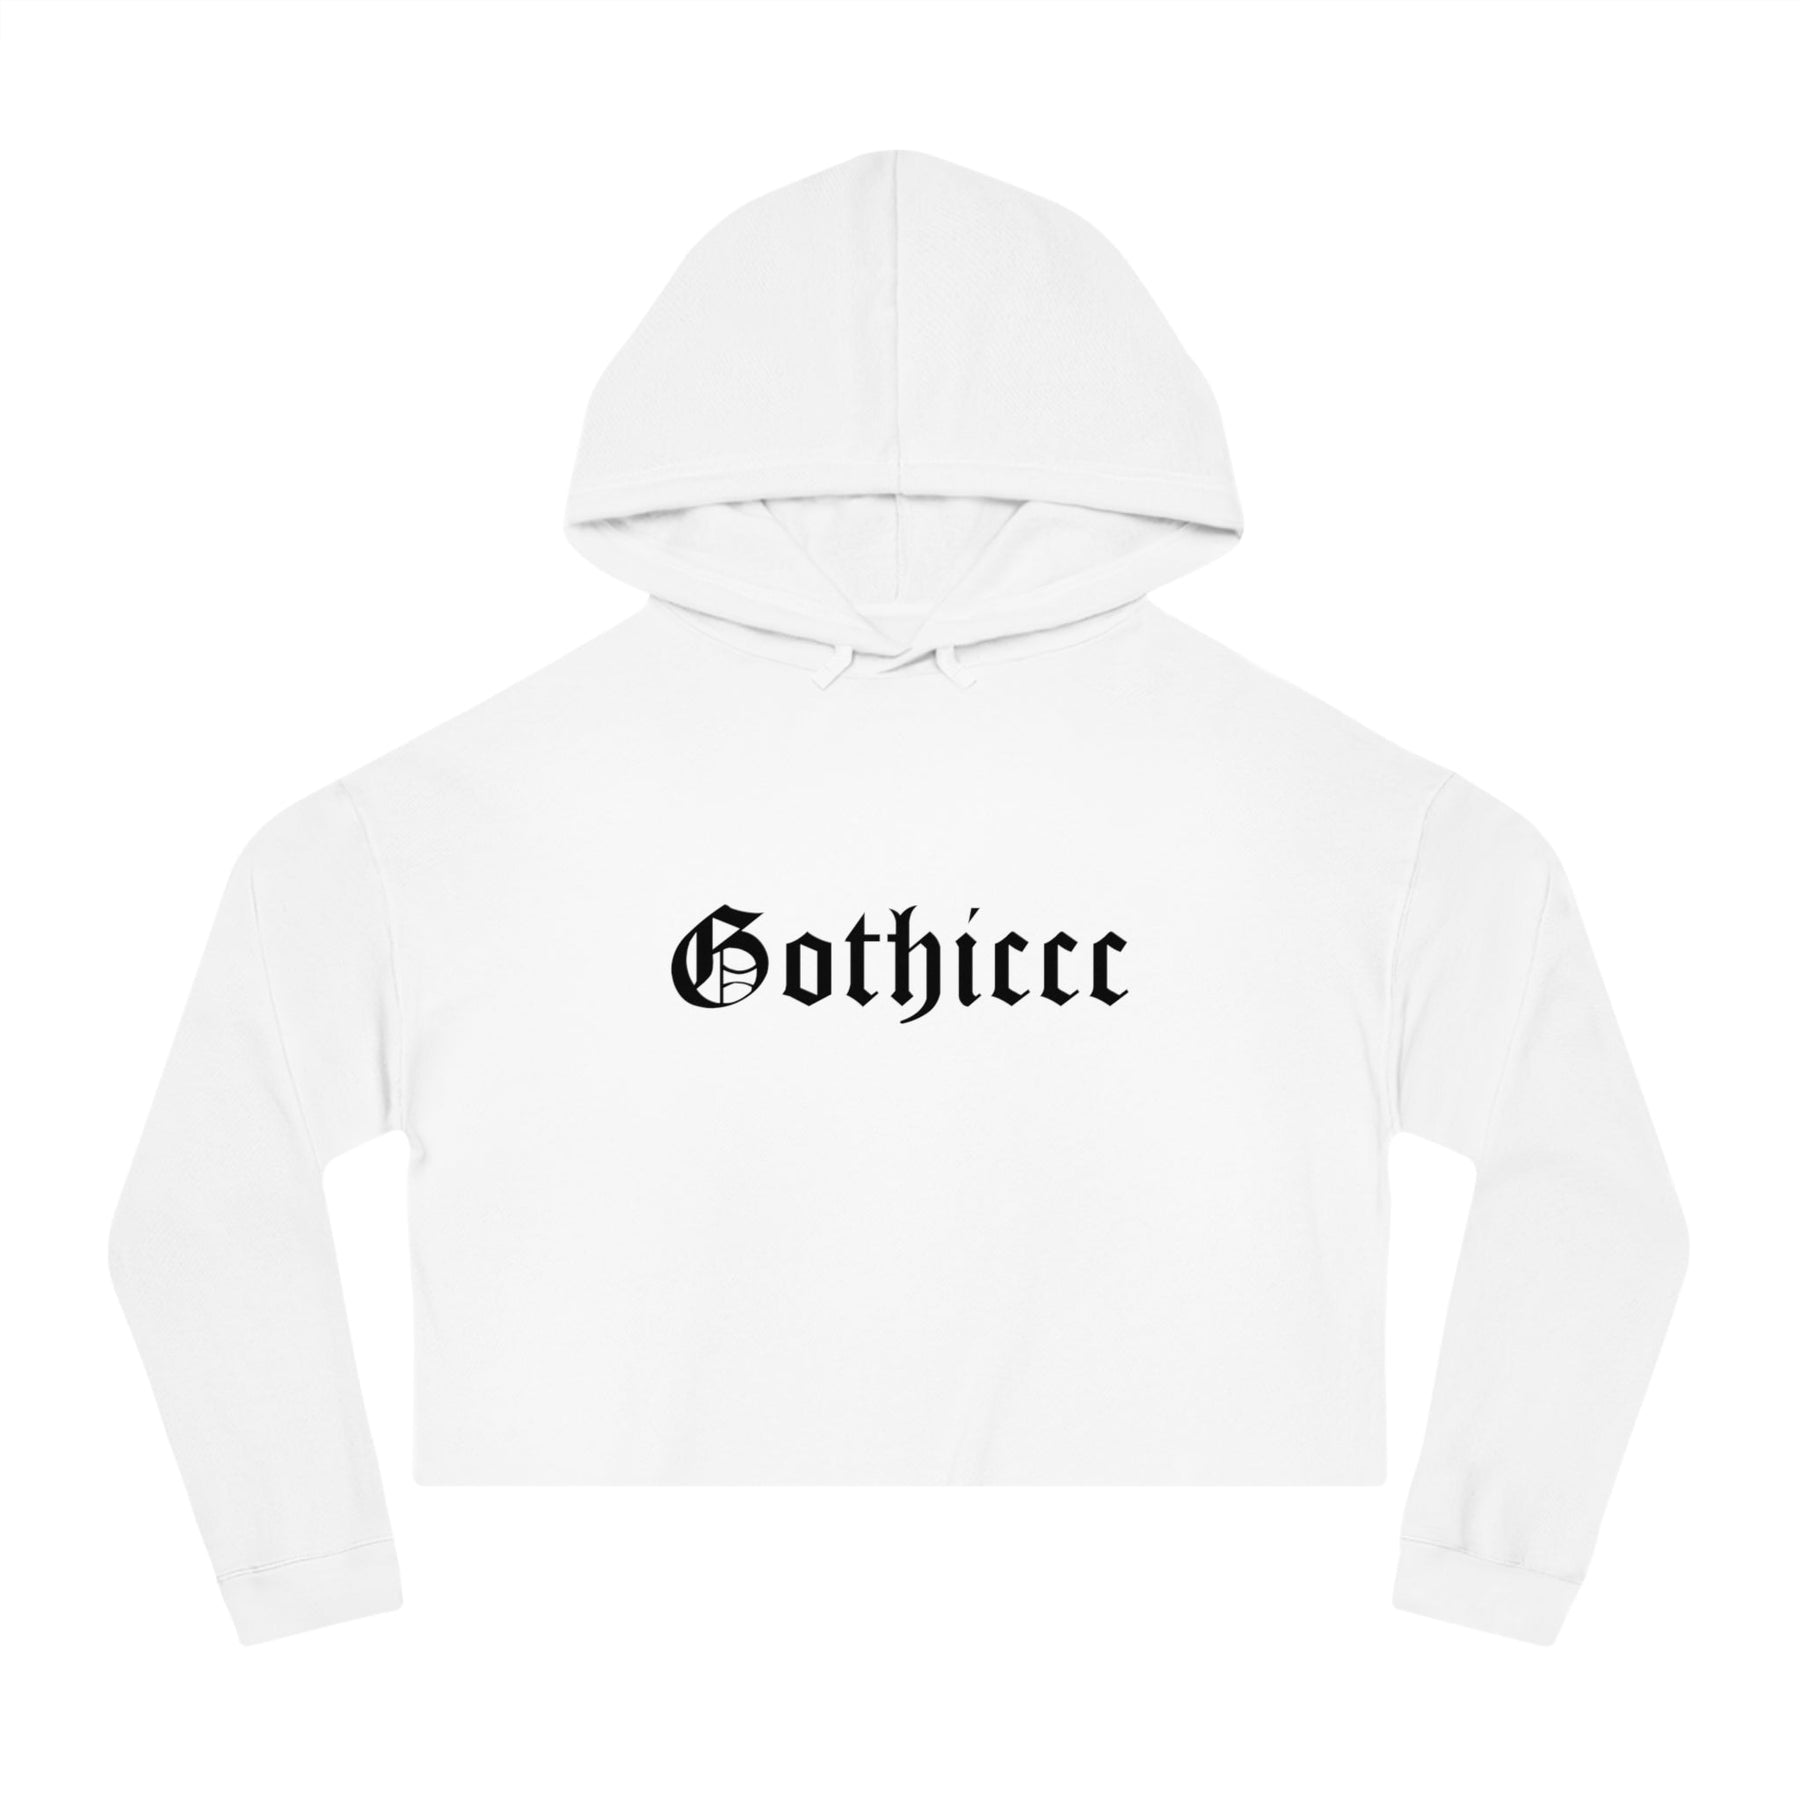 Gothiccc Women’s Cropped Hooded Sweatshirt - Goth Cloth Co.Hoodie29965333630561892913